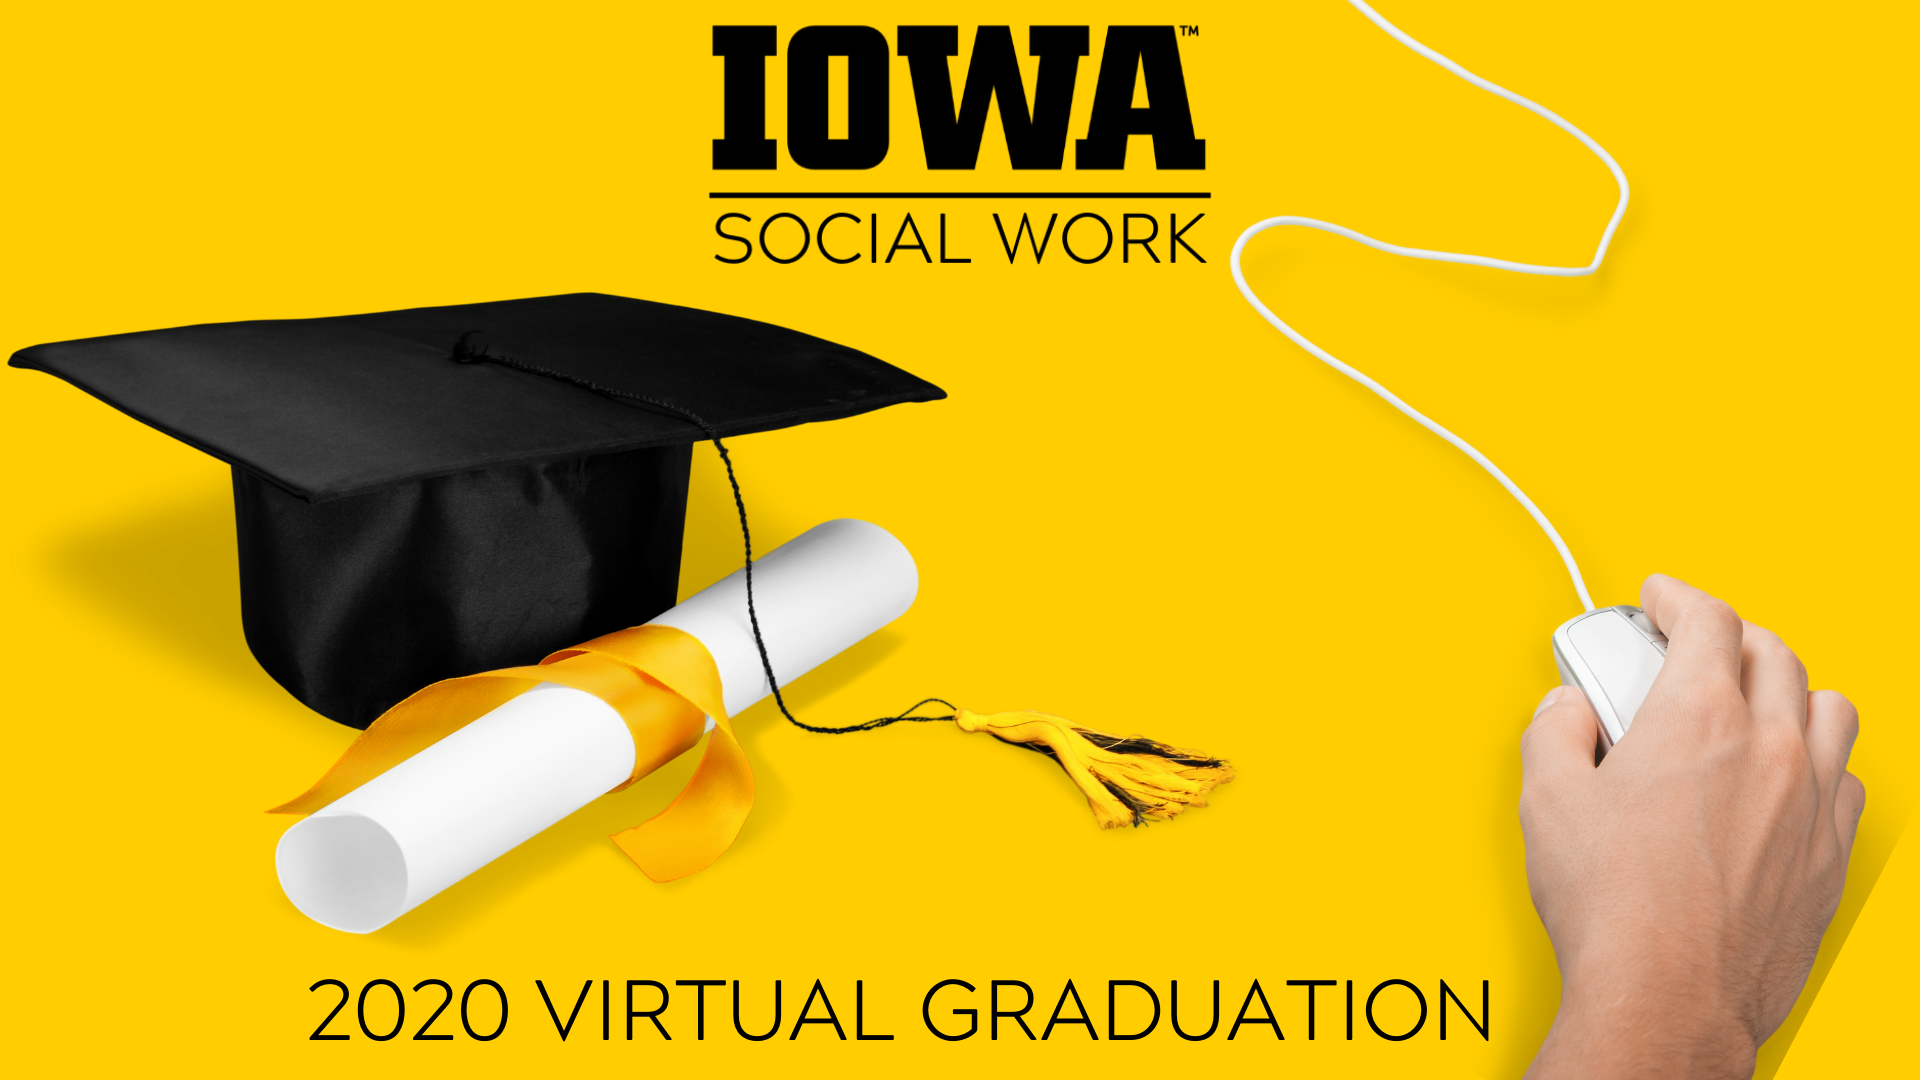 Yellow background with image of mortarboard and diploma next to a hand on a computer mouse. The text says IOWA SOCIAL WORK 2020 VIRTUAL GRADUATION